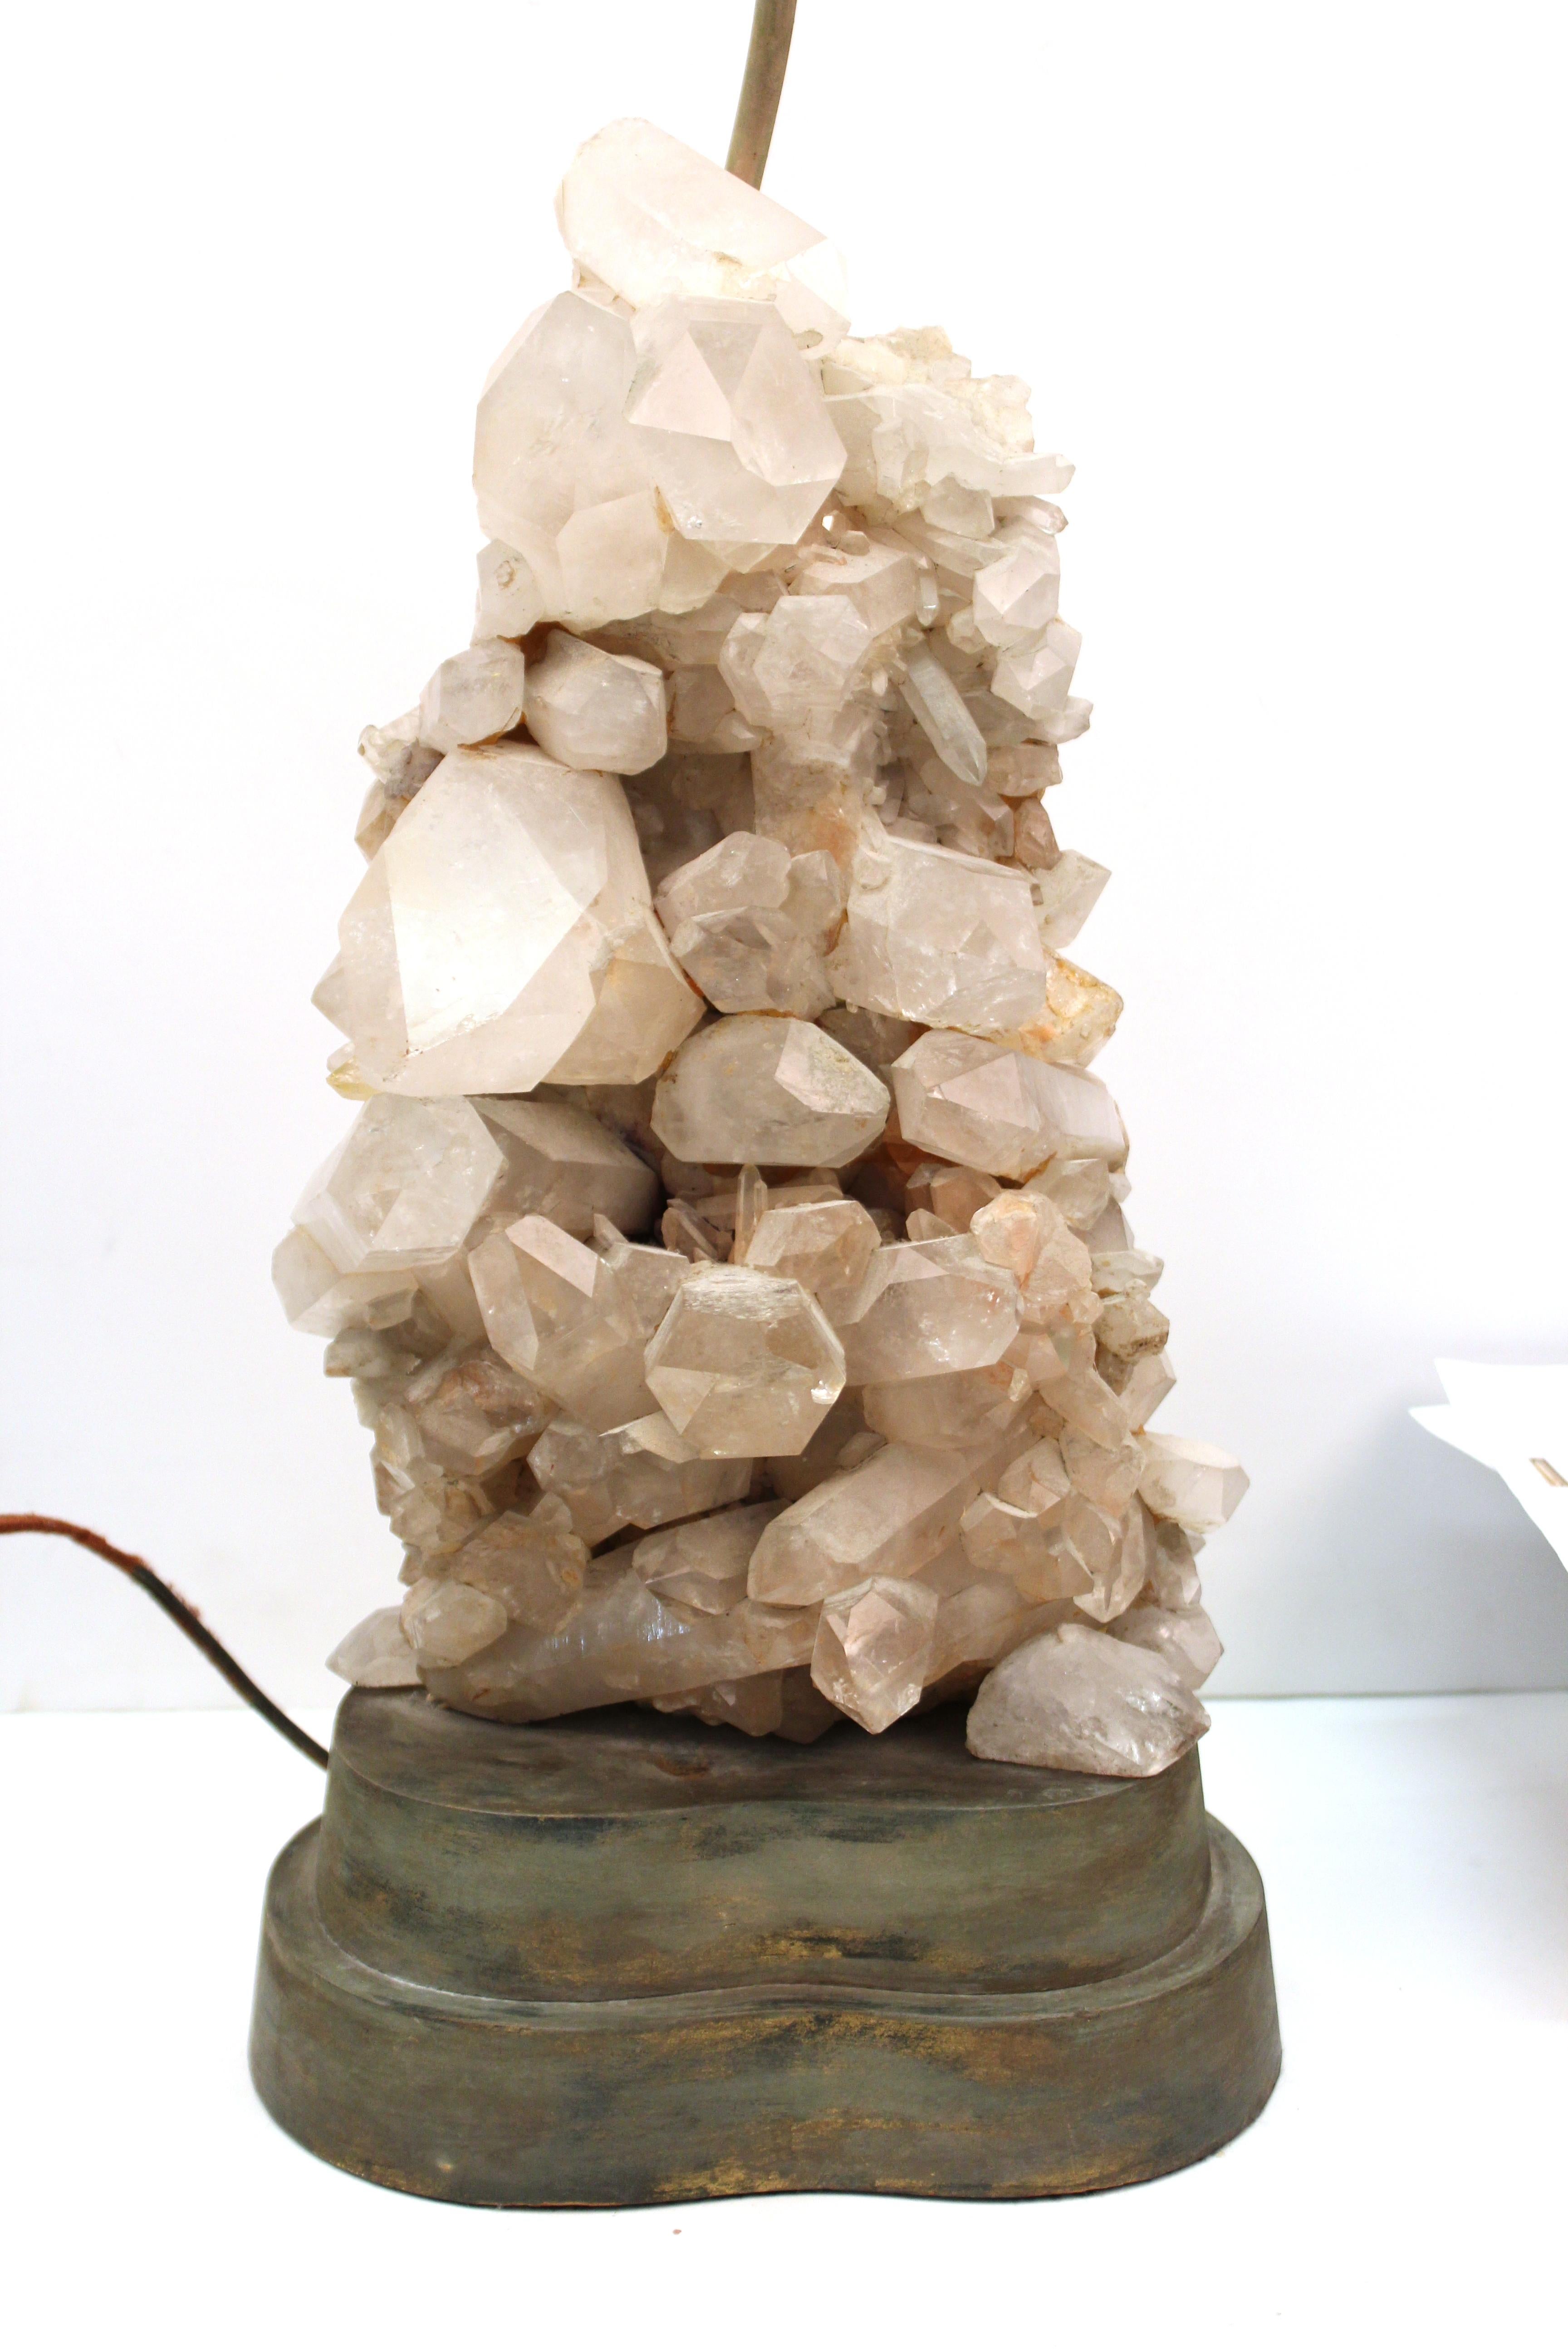 Mid-Century Modern quartz crystal cluster table lamp designed by Carole Stupell. The piece has a large cluster of quartz crystals atop a kidney-shaped wooden base. Made in circa 1950, the piece is in great vintage condition with age-appropriate wear